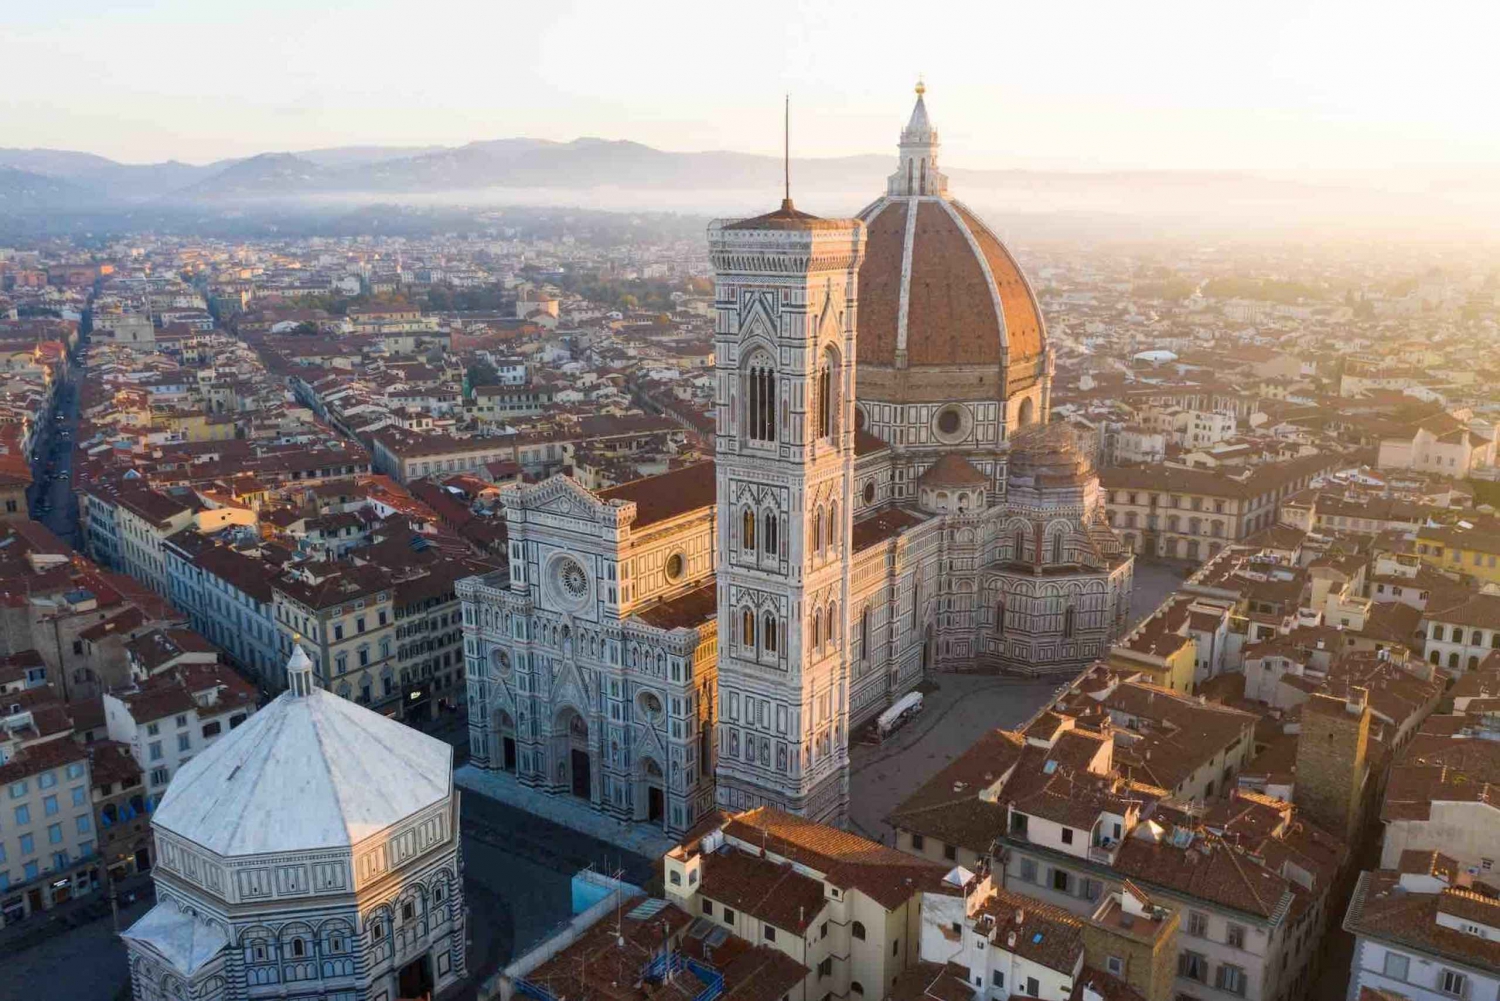 Florence: Giotto's Bell Tower, 4 more Monuments + AudioApp